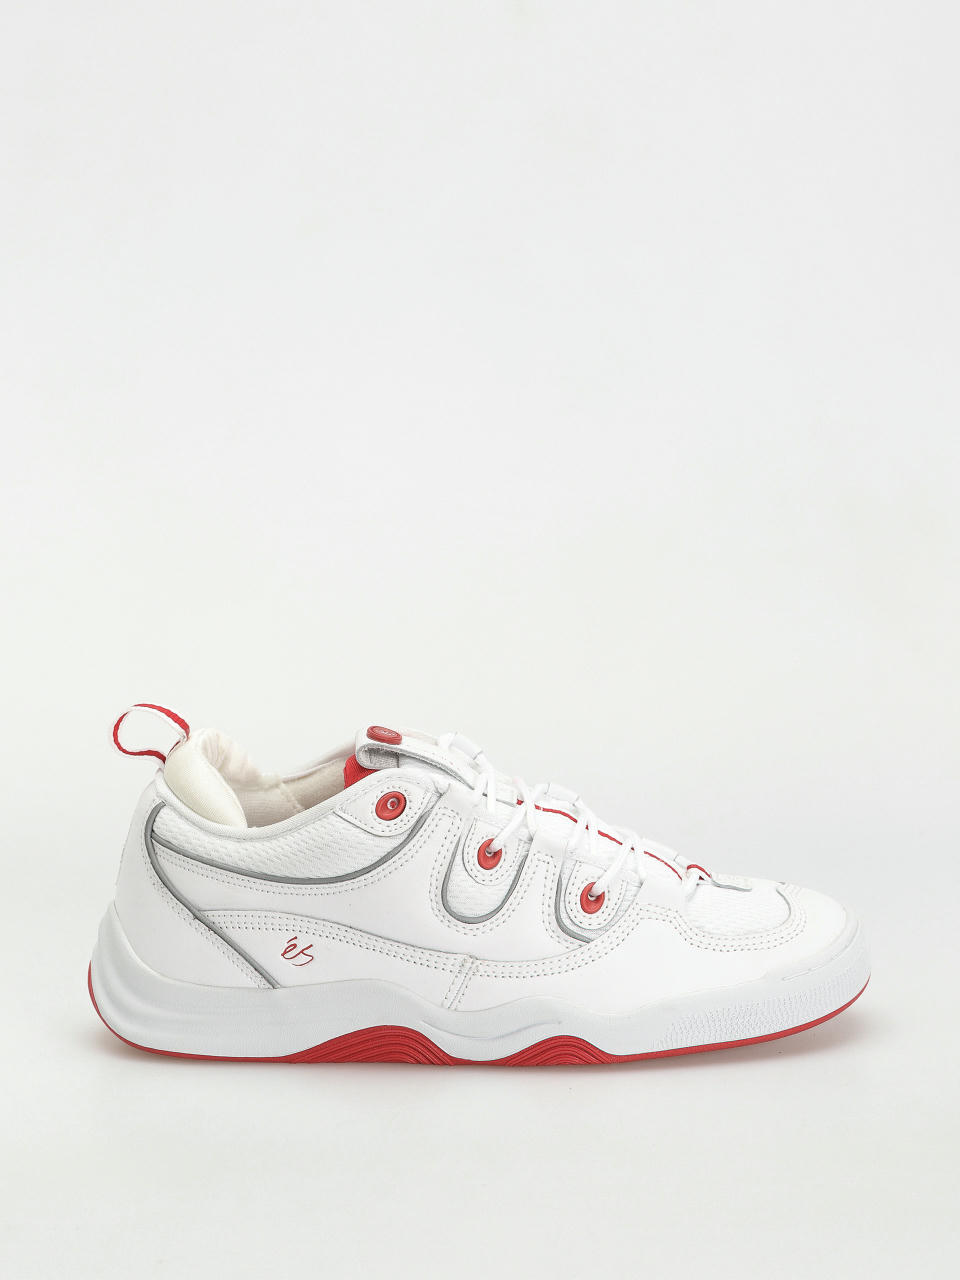 eS Two Nine 8 Schuhe (white/red)